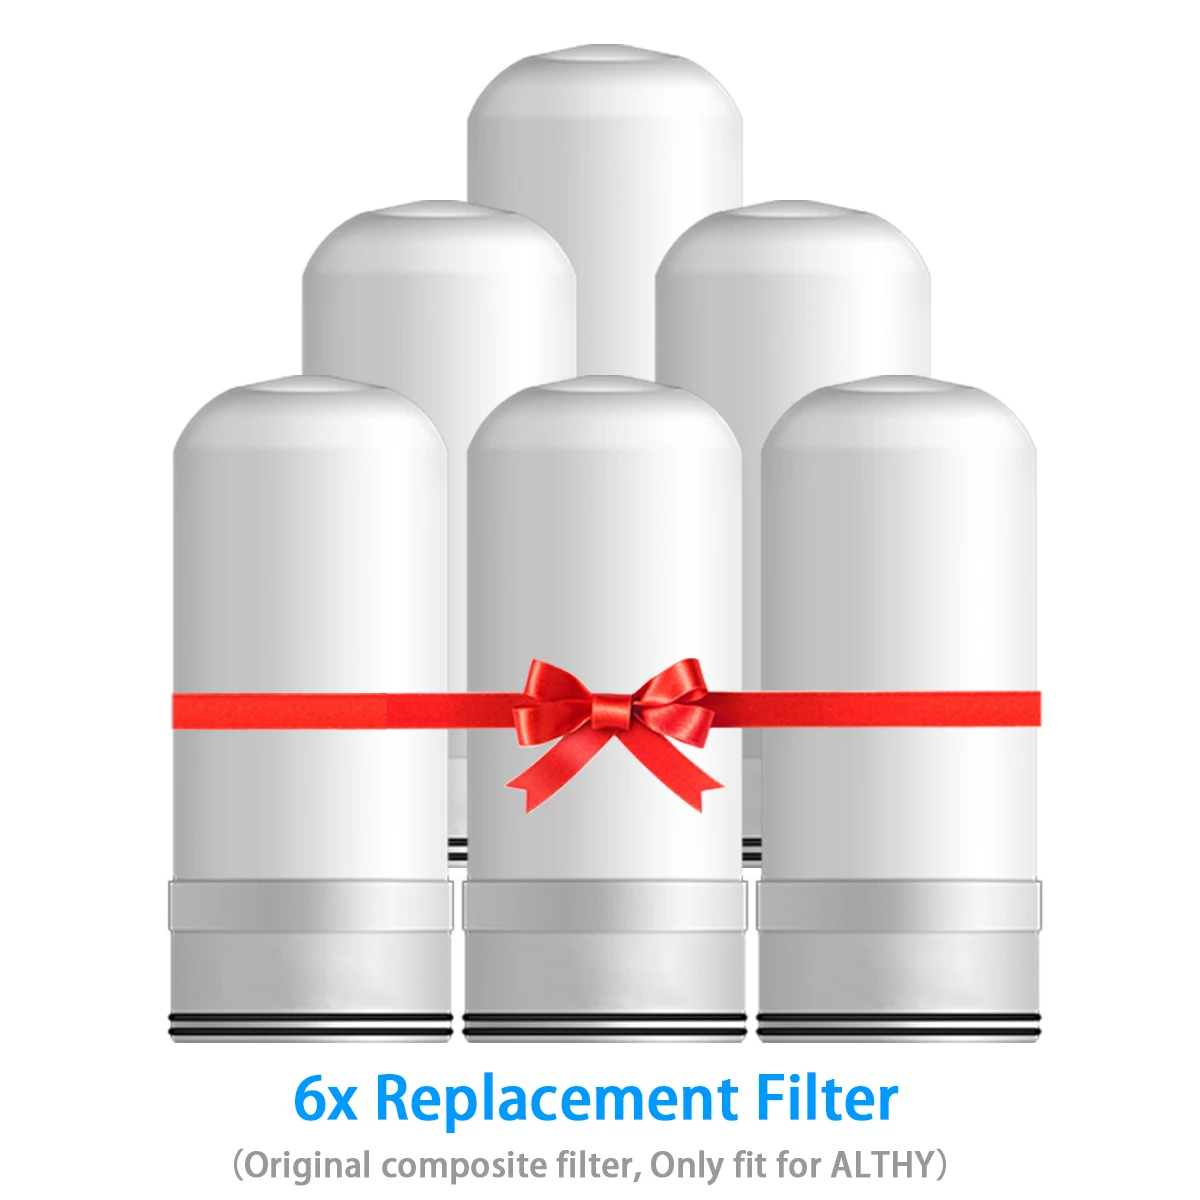 Ceramic Replacement Filter for ALTHY Tap Water Filter Purifier  - Retain Alkaline Minerals - Remove odor Chlorine